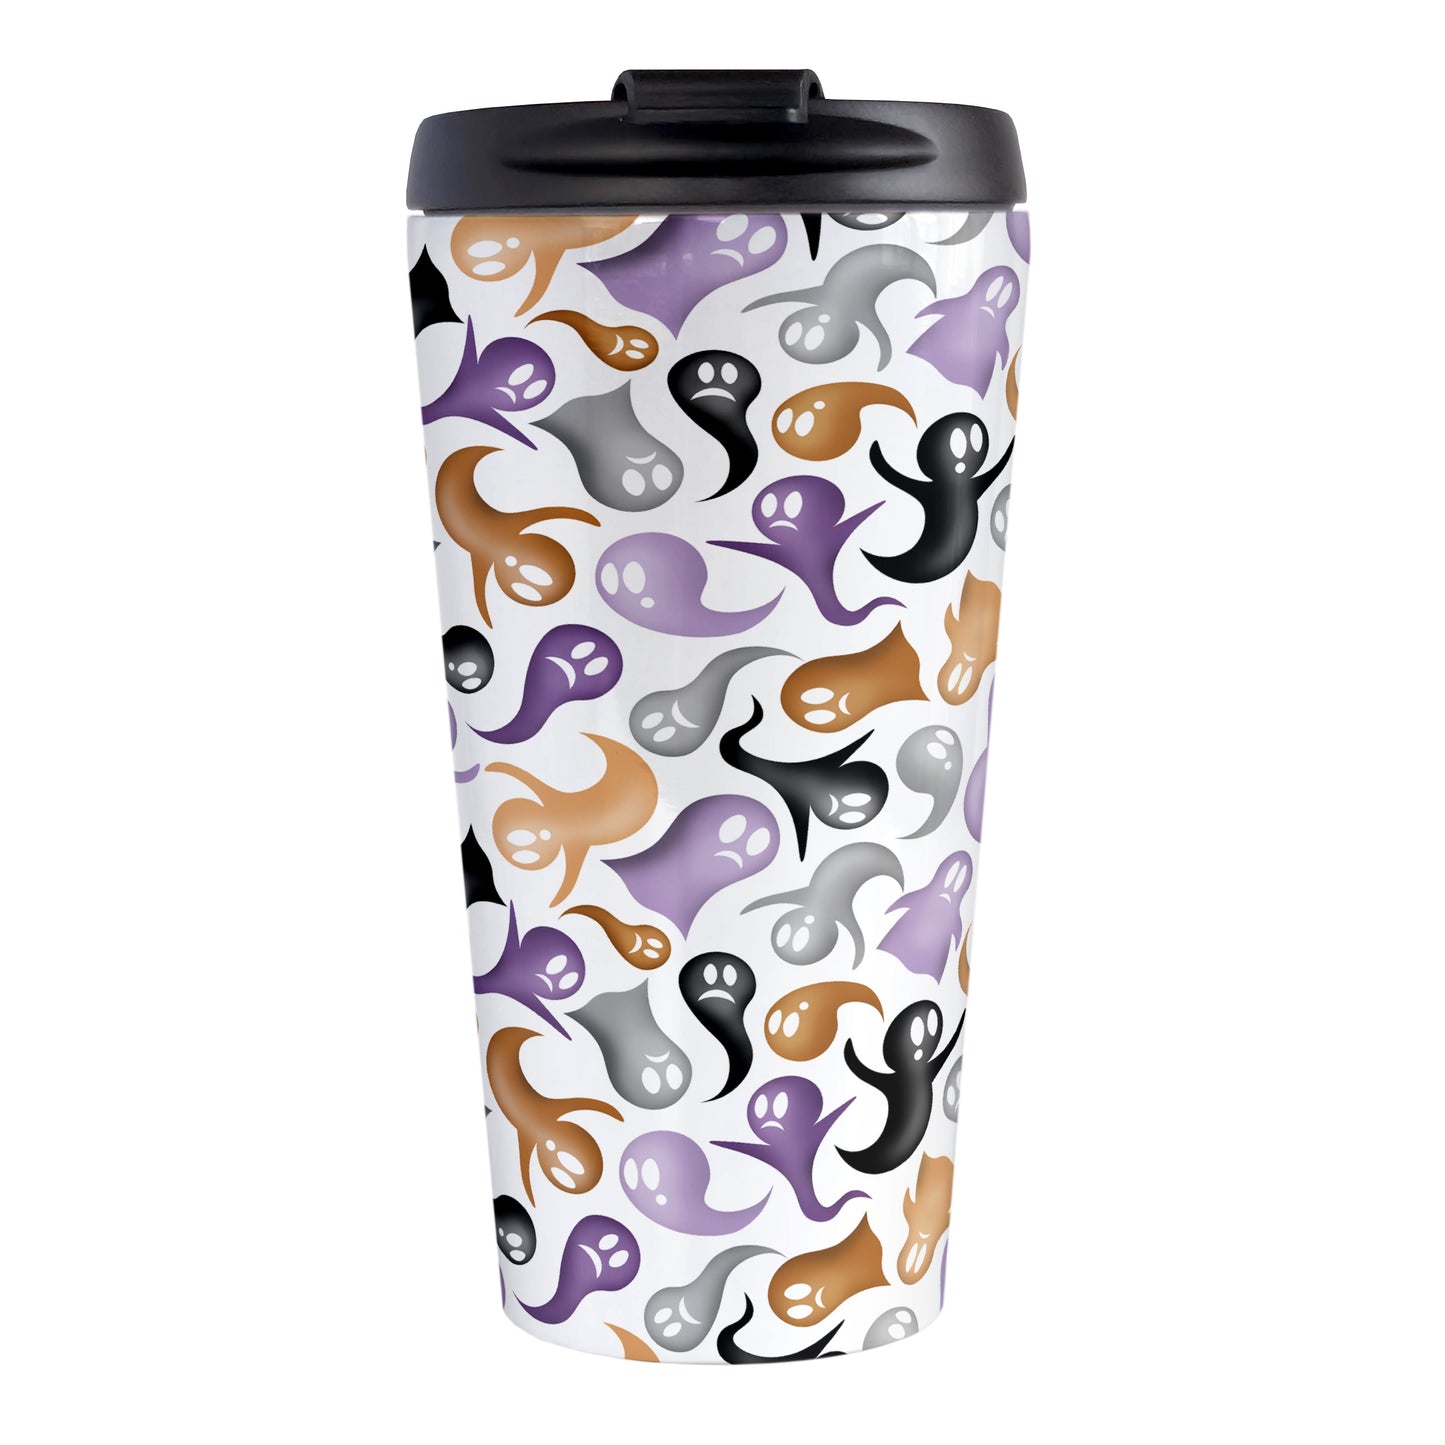 Ghosts and Spirits Halloween Travel Mug (15oz) at Amy's Coffee Mugs. A stainless steel insulated travel mug designed with a whimsical pattern of purple, orange, black and gray ghosts and spirits that wraps around the travel mug.